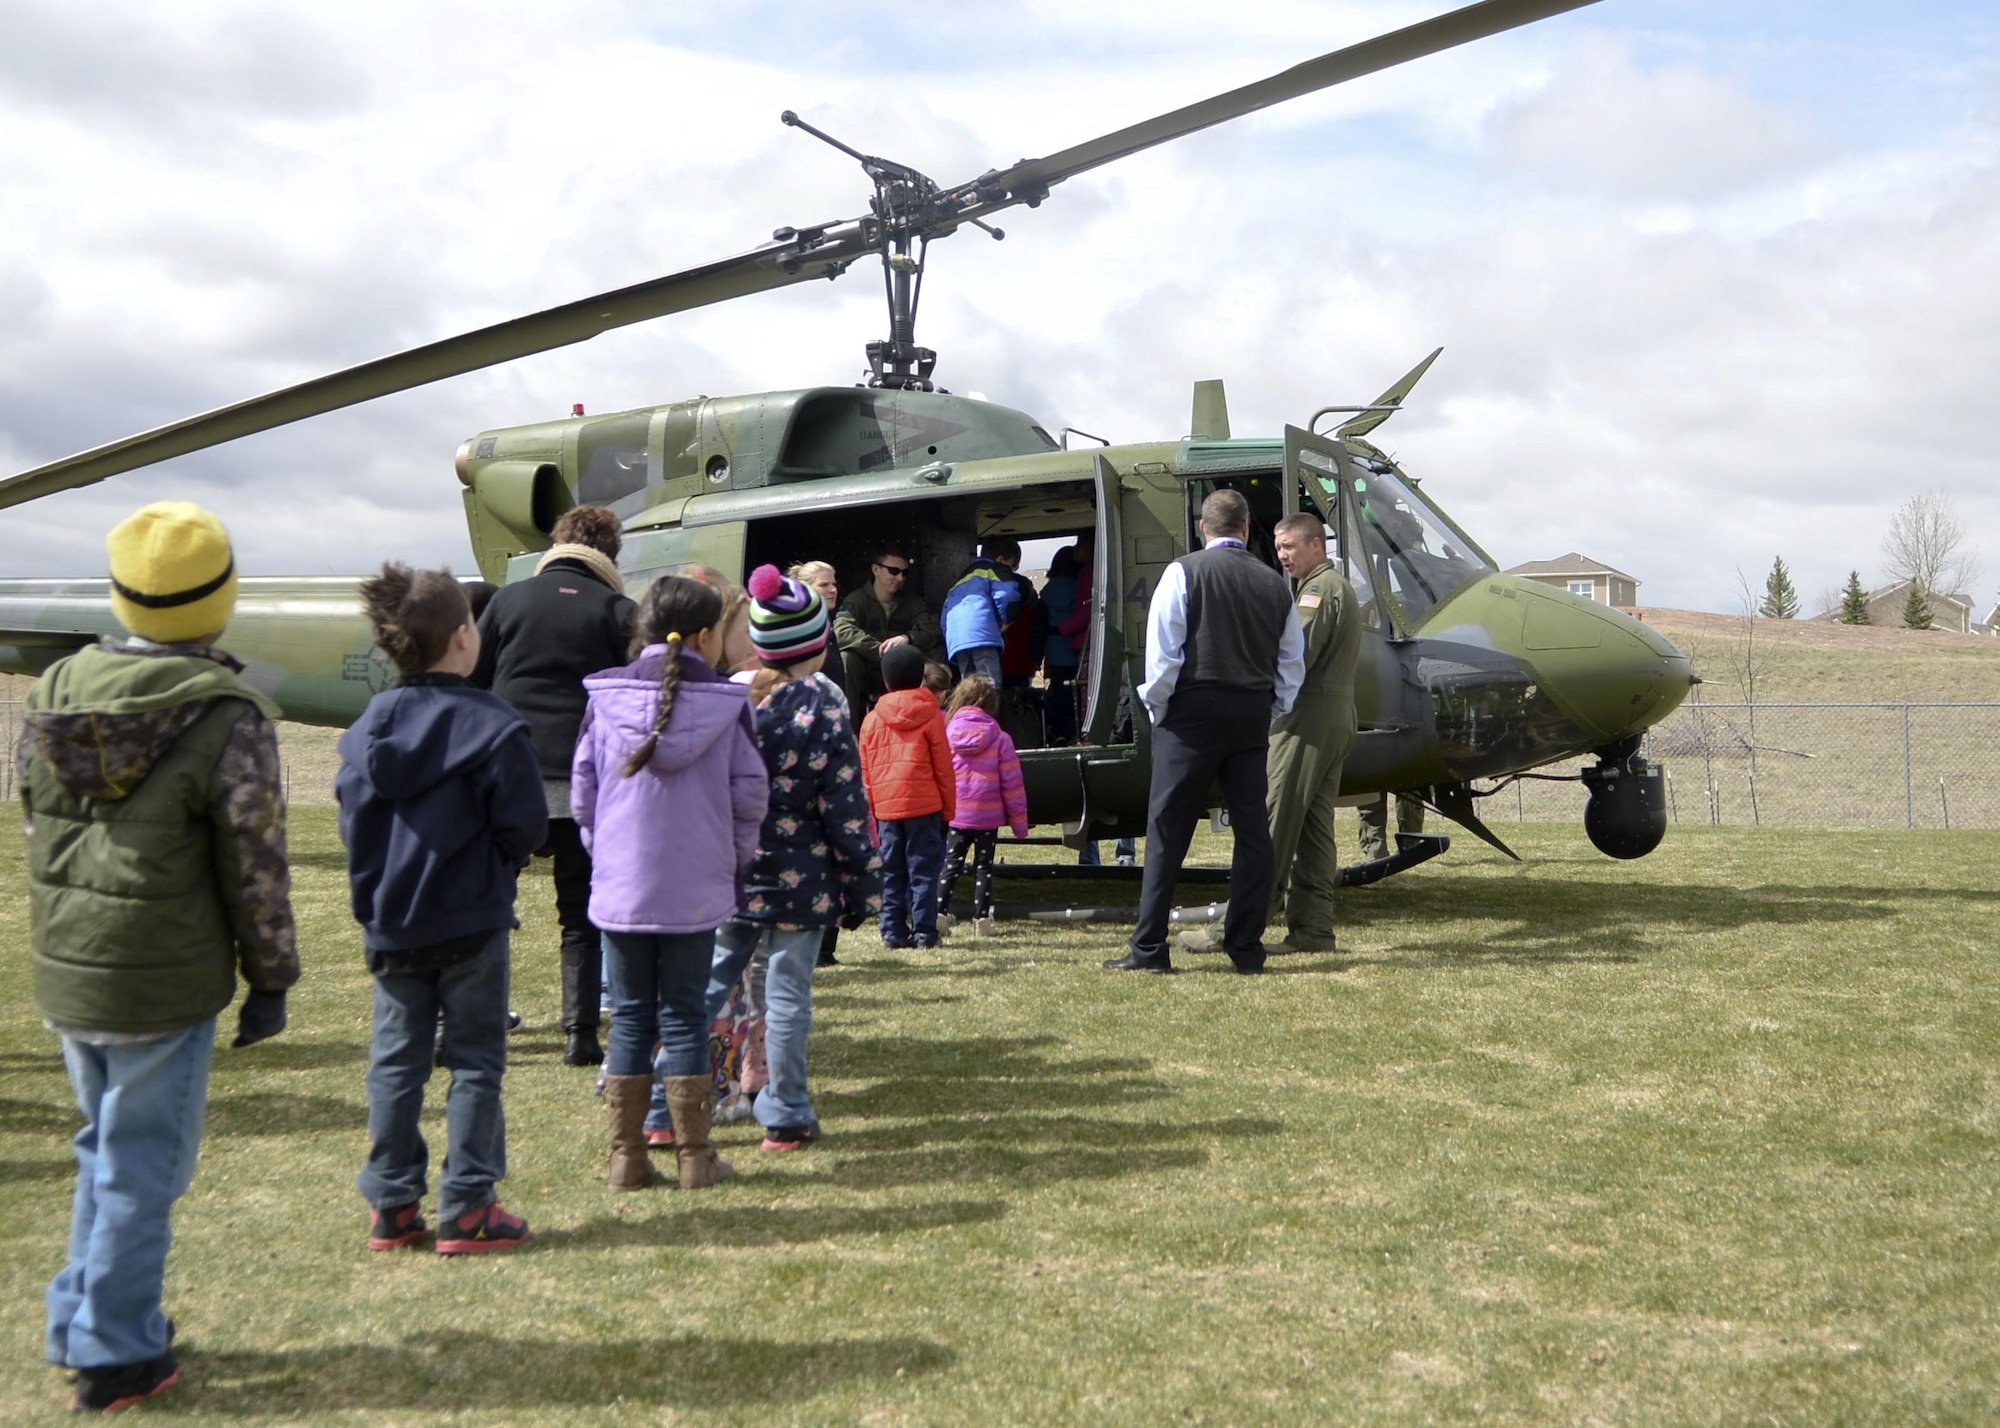 Children from Freedom Elementary School, Cheyenne, Wyo., line up to view one of the 37th Helicopter Squadron UH-1N Bell Helicopter April 20, 2016. Several dozen children were able to view the helicopter and have their questions answered by the crew.